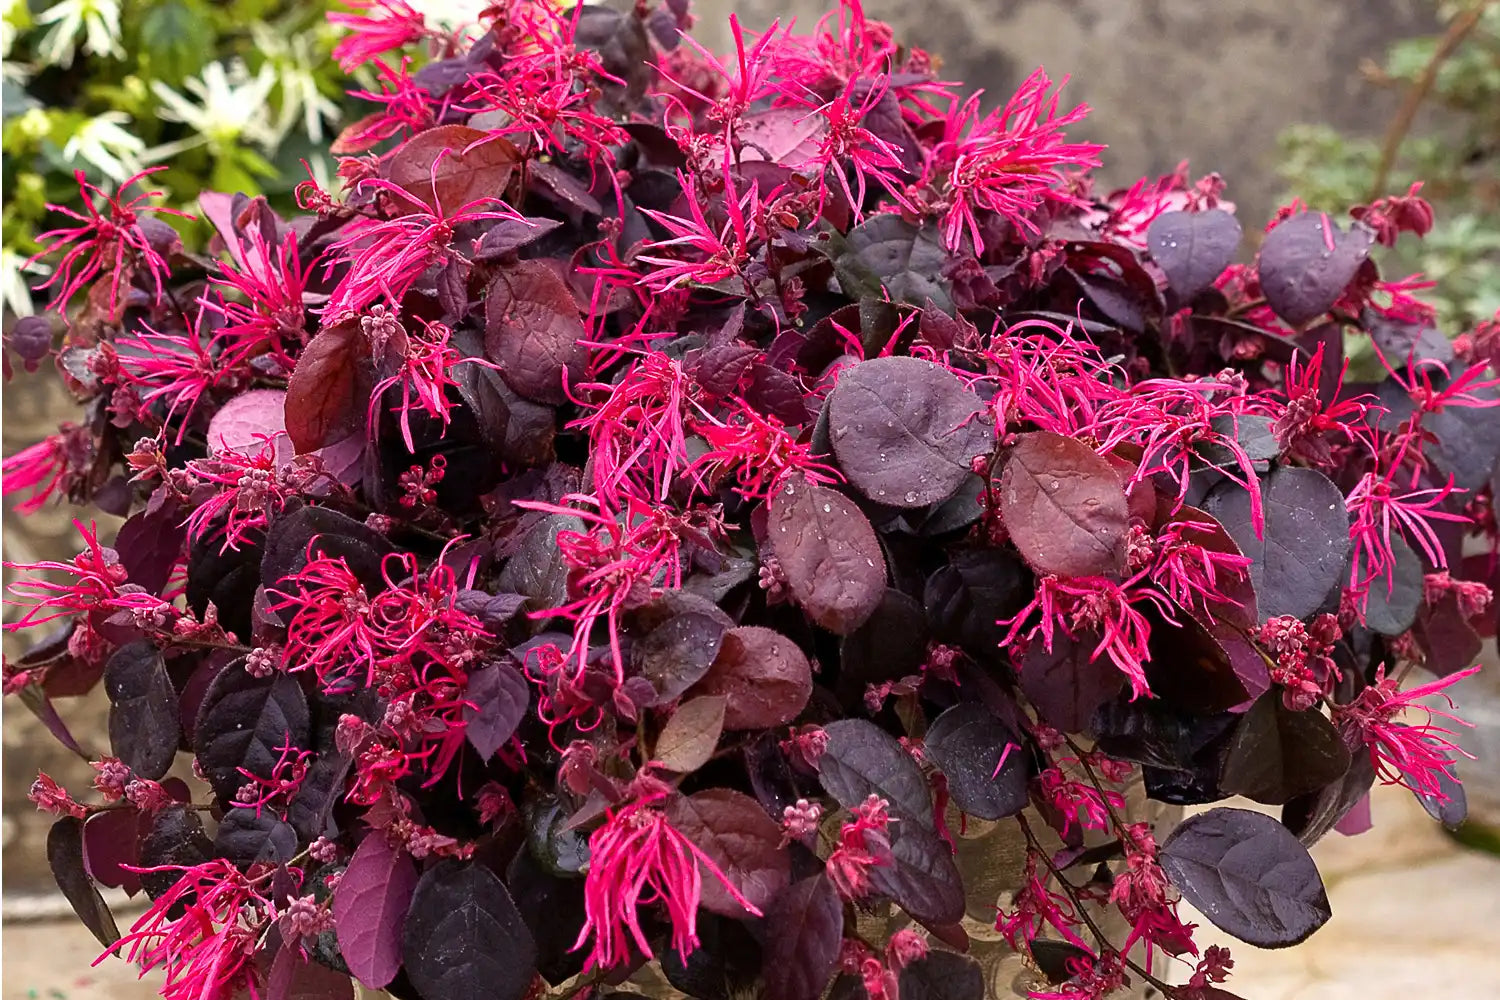 Jazz Hands Bold Loropetalum planted in a patio container, its  dozens of showy sprays of magenta fireworks-like blooms with deep purple foliage may attract a whole family of pollinators. We'll have to wait and see.